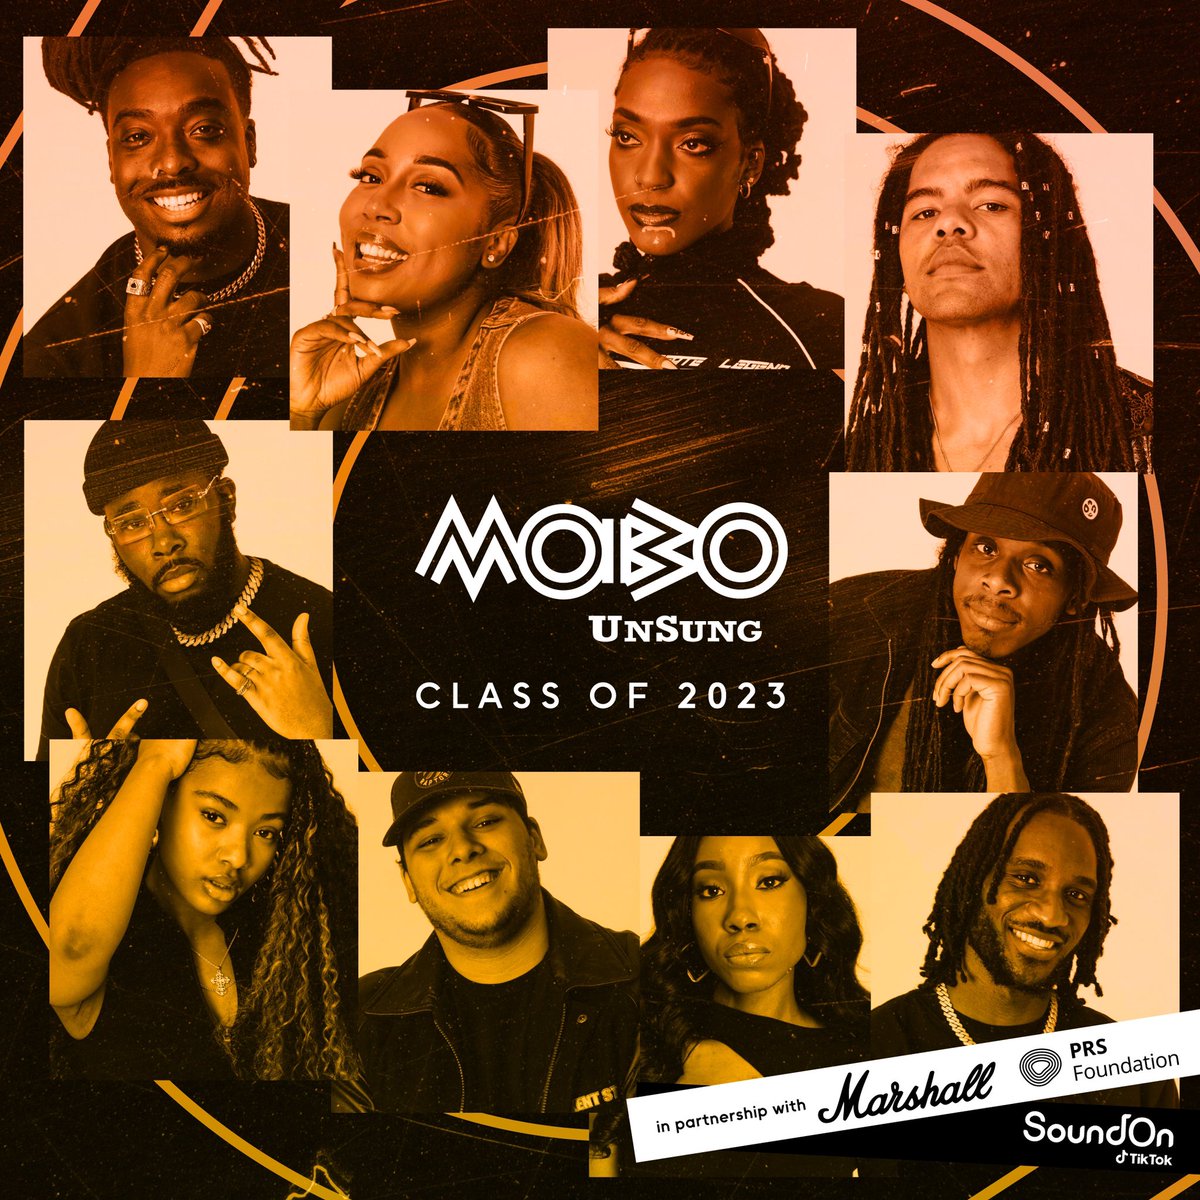 Enjoy all the music of the #MOBOUnSung UnSung Class of 2023 on our @SpotifyUK playlist! 🎤 🎵✨ Featuring @iamMelica_, @dejadejaaaa, @joshbarrymusic, @KanivaOH and more, we’ve got this on repeat all day 🔁 spoti.fi/3vb3vvV